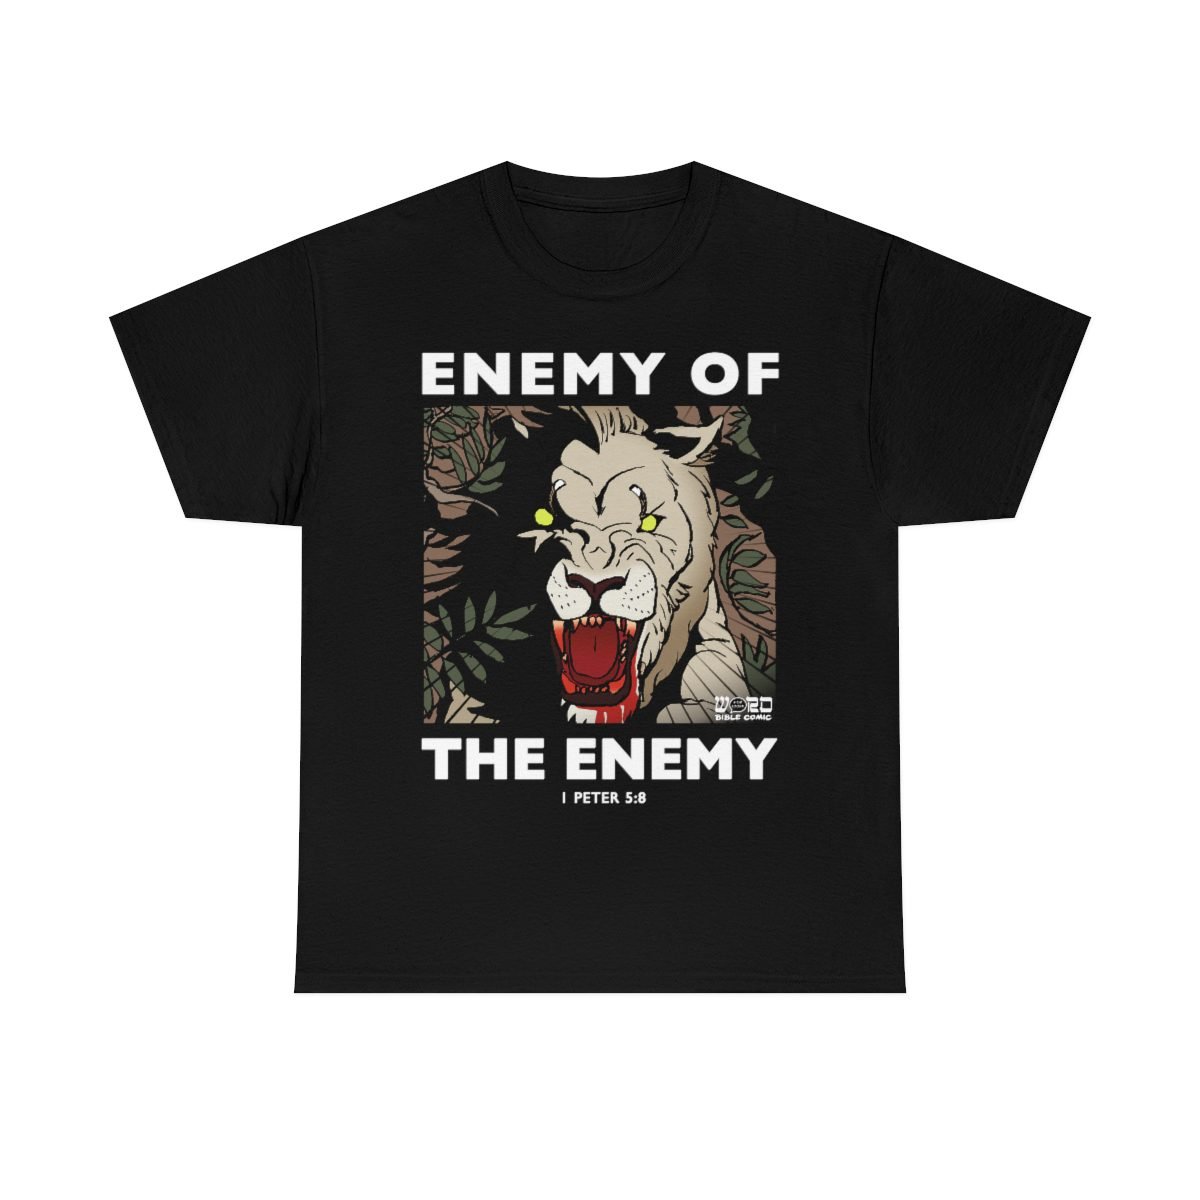 Word For Word Bible Comics – Enemy of the Enemy Short Sleeve Tshirt (5000)